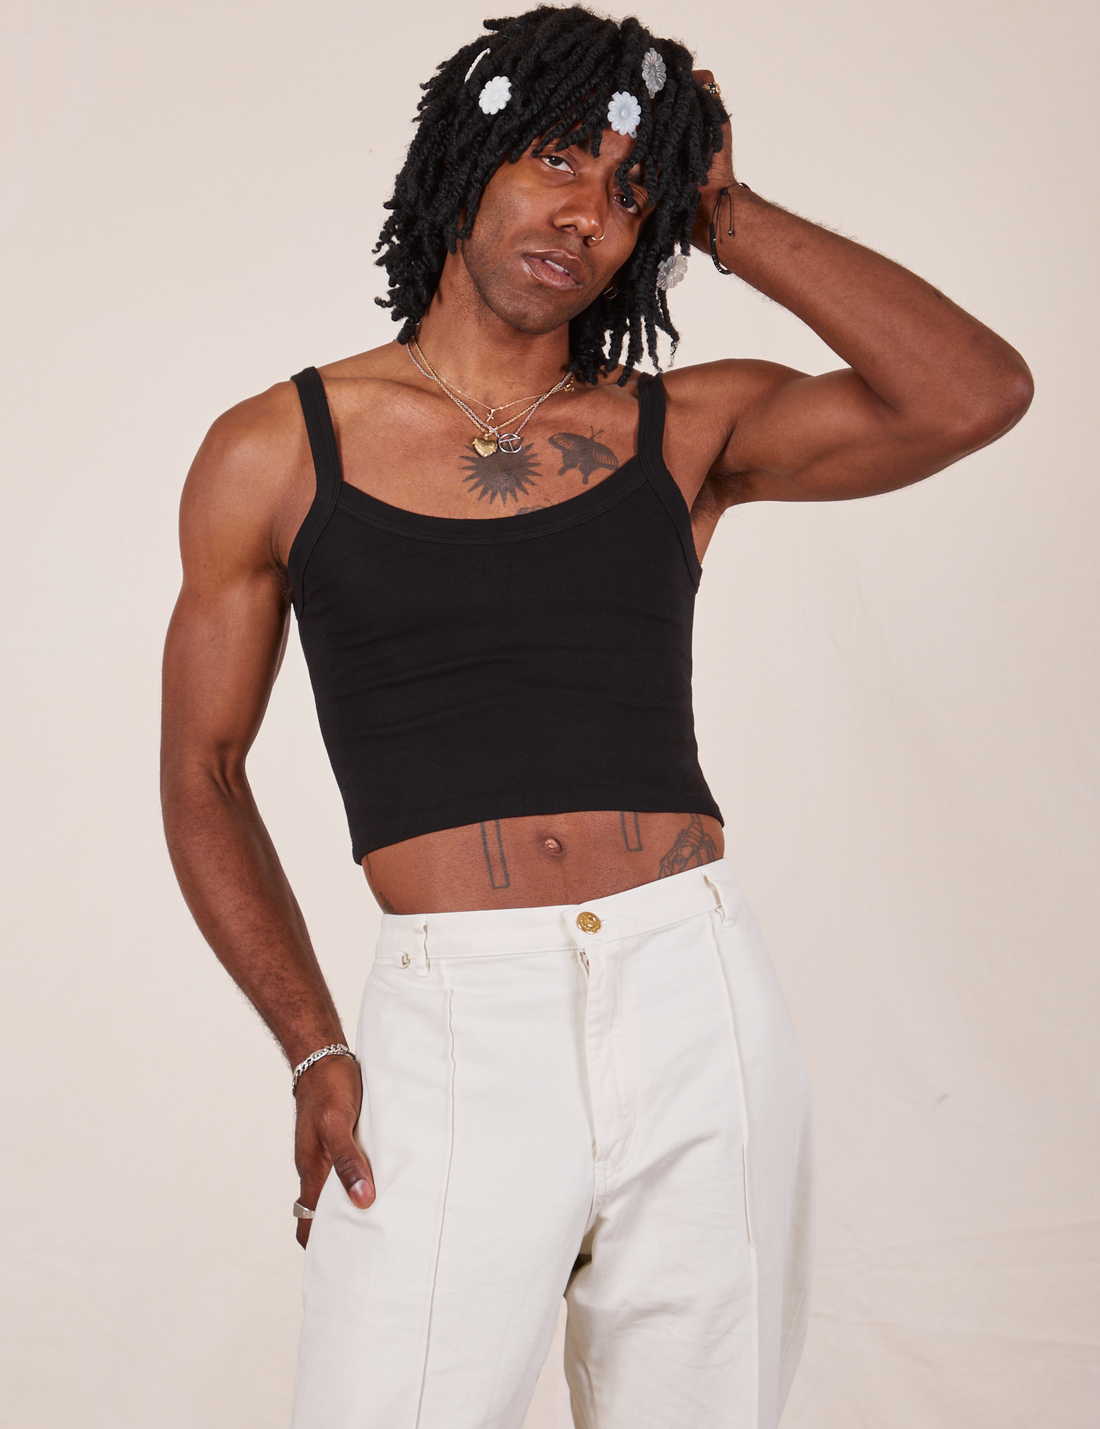 Jerrod is wearing Cropped Cami in Basic Black and vintage off-white Western Pants